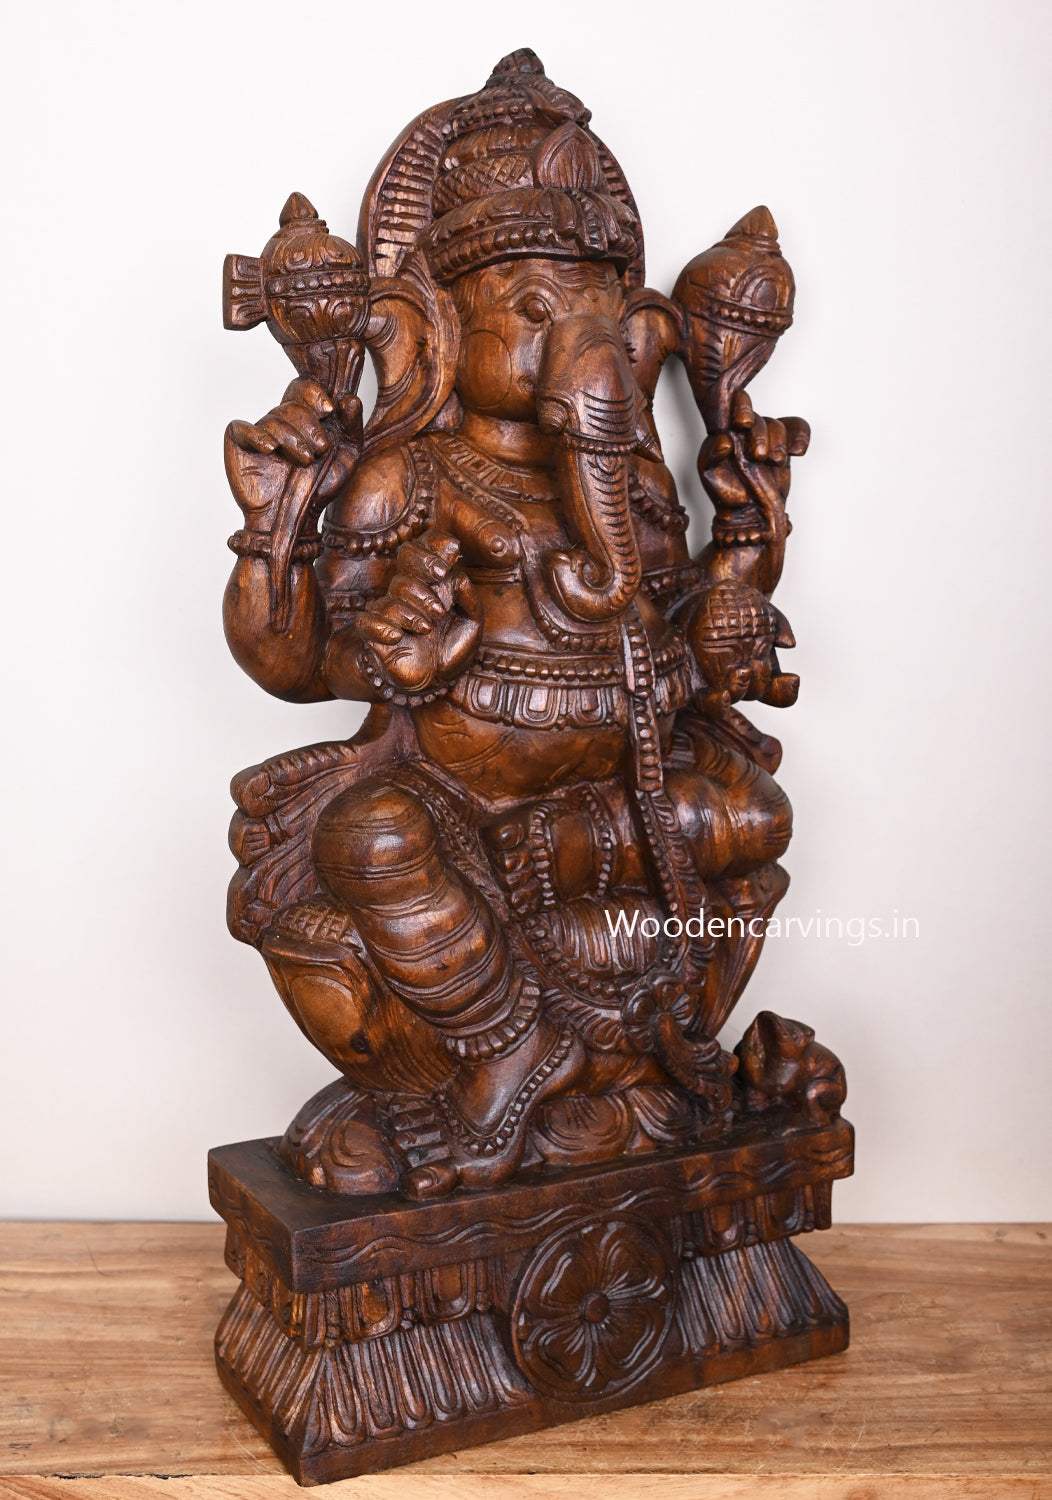 Murthi Maha Ganapathy Seated on Lotus With His Vahana Mouse Wooden Handmade Fine Wax Brown Sculpture 31"